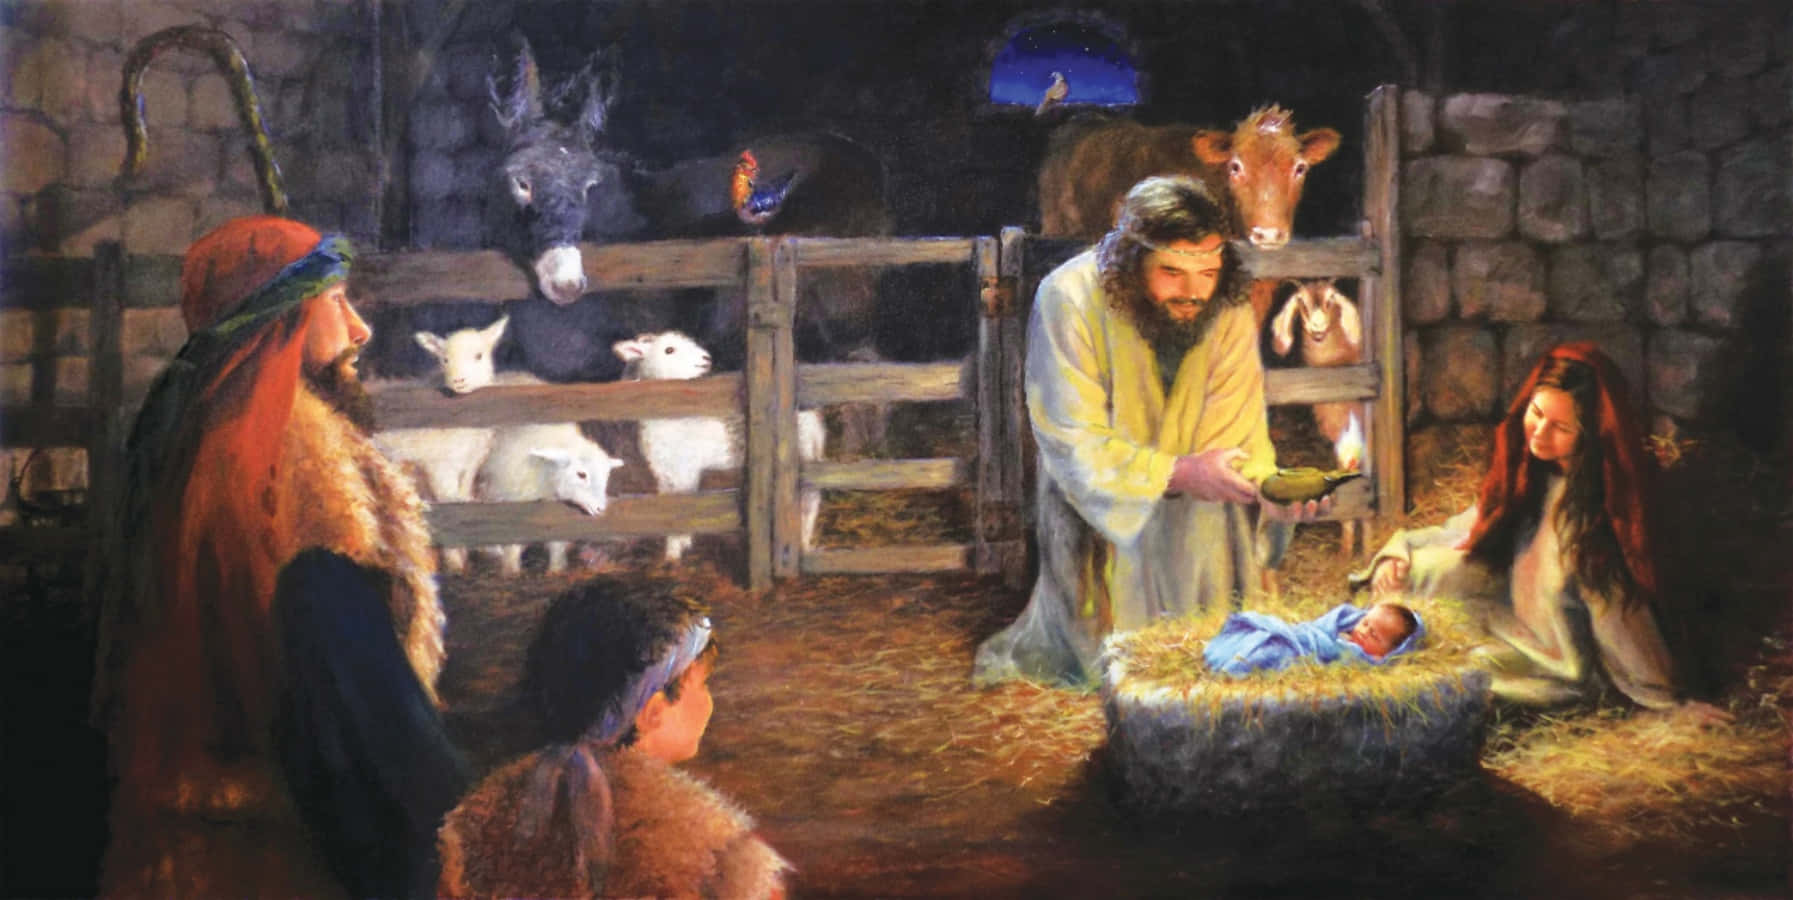 An Illustration of the Nativity Story